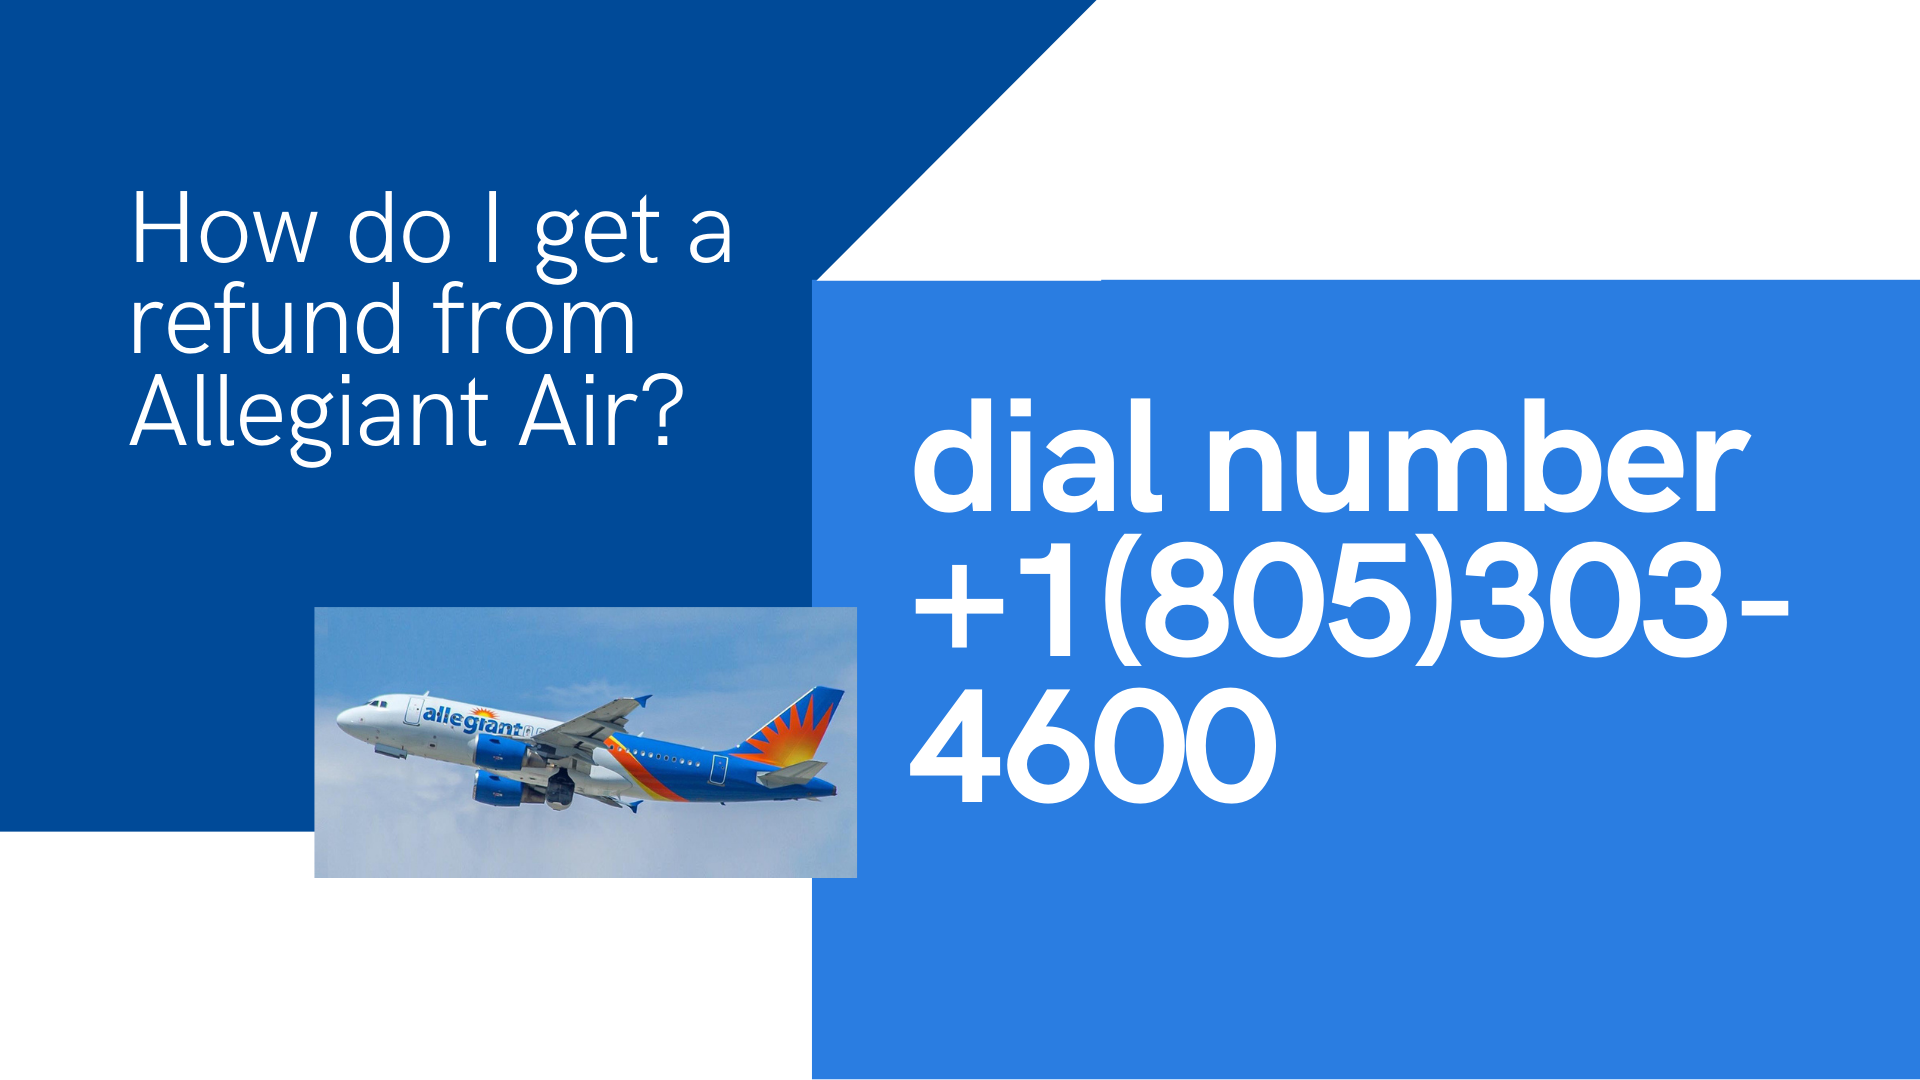 am-i-able-to-get-a-refund-from-allegiant-air-1-805-303-4600